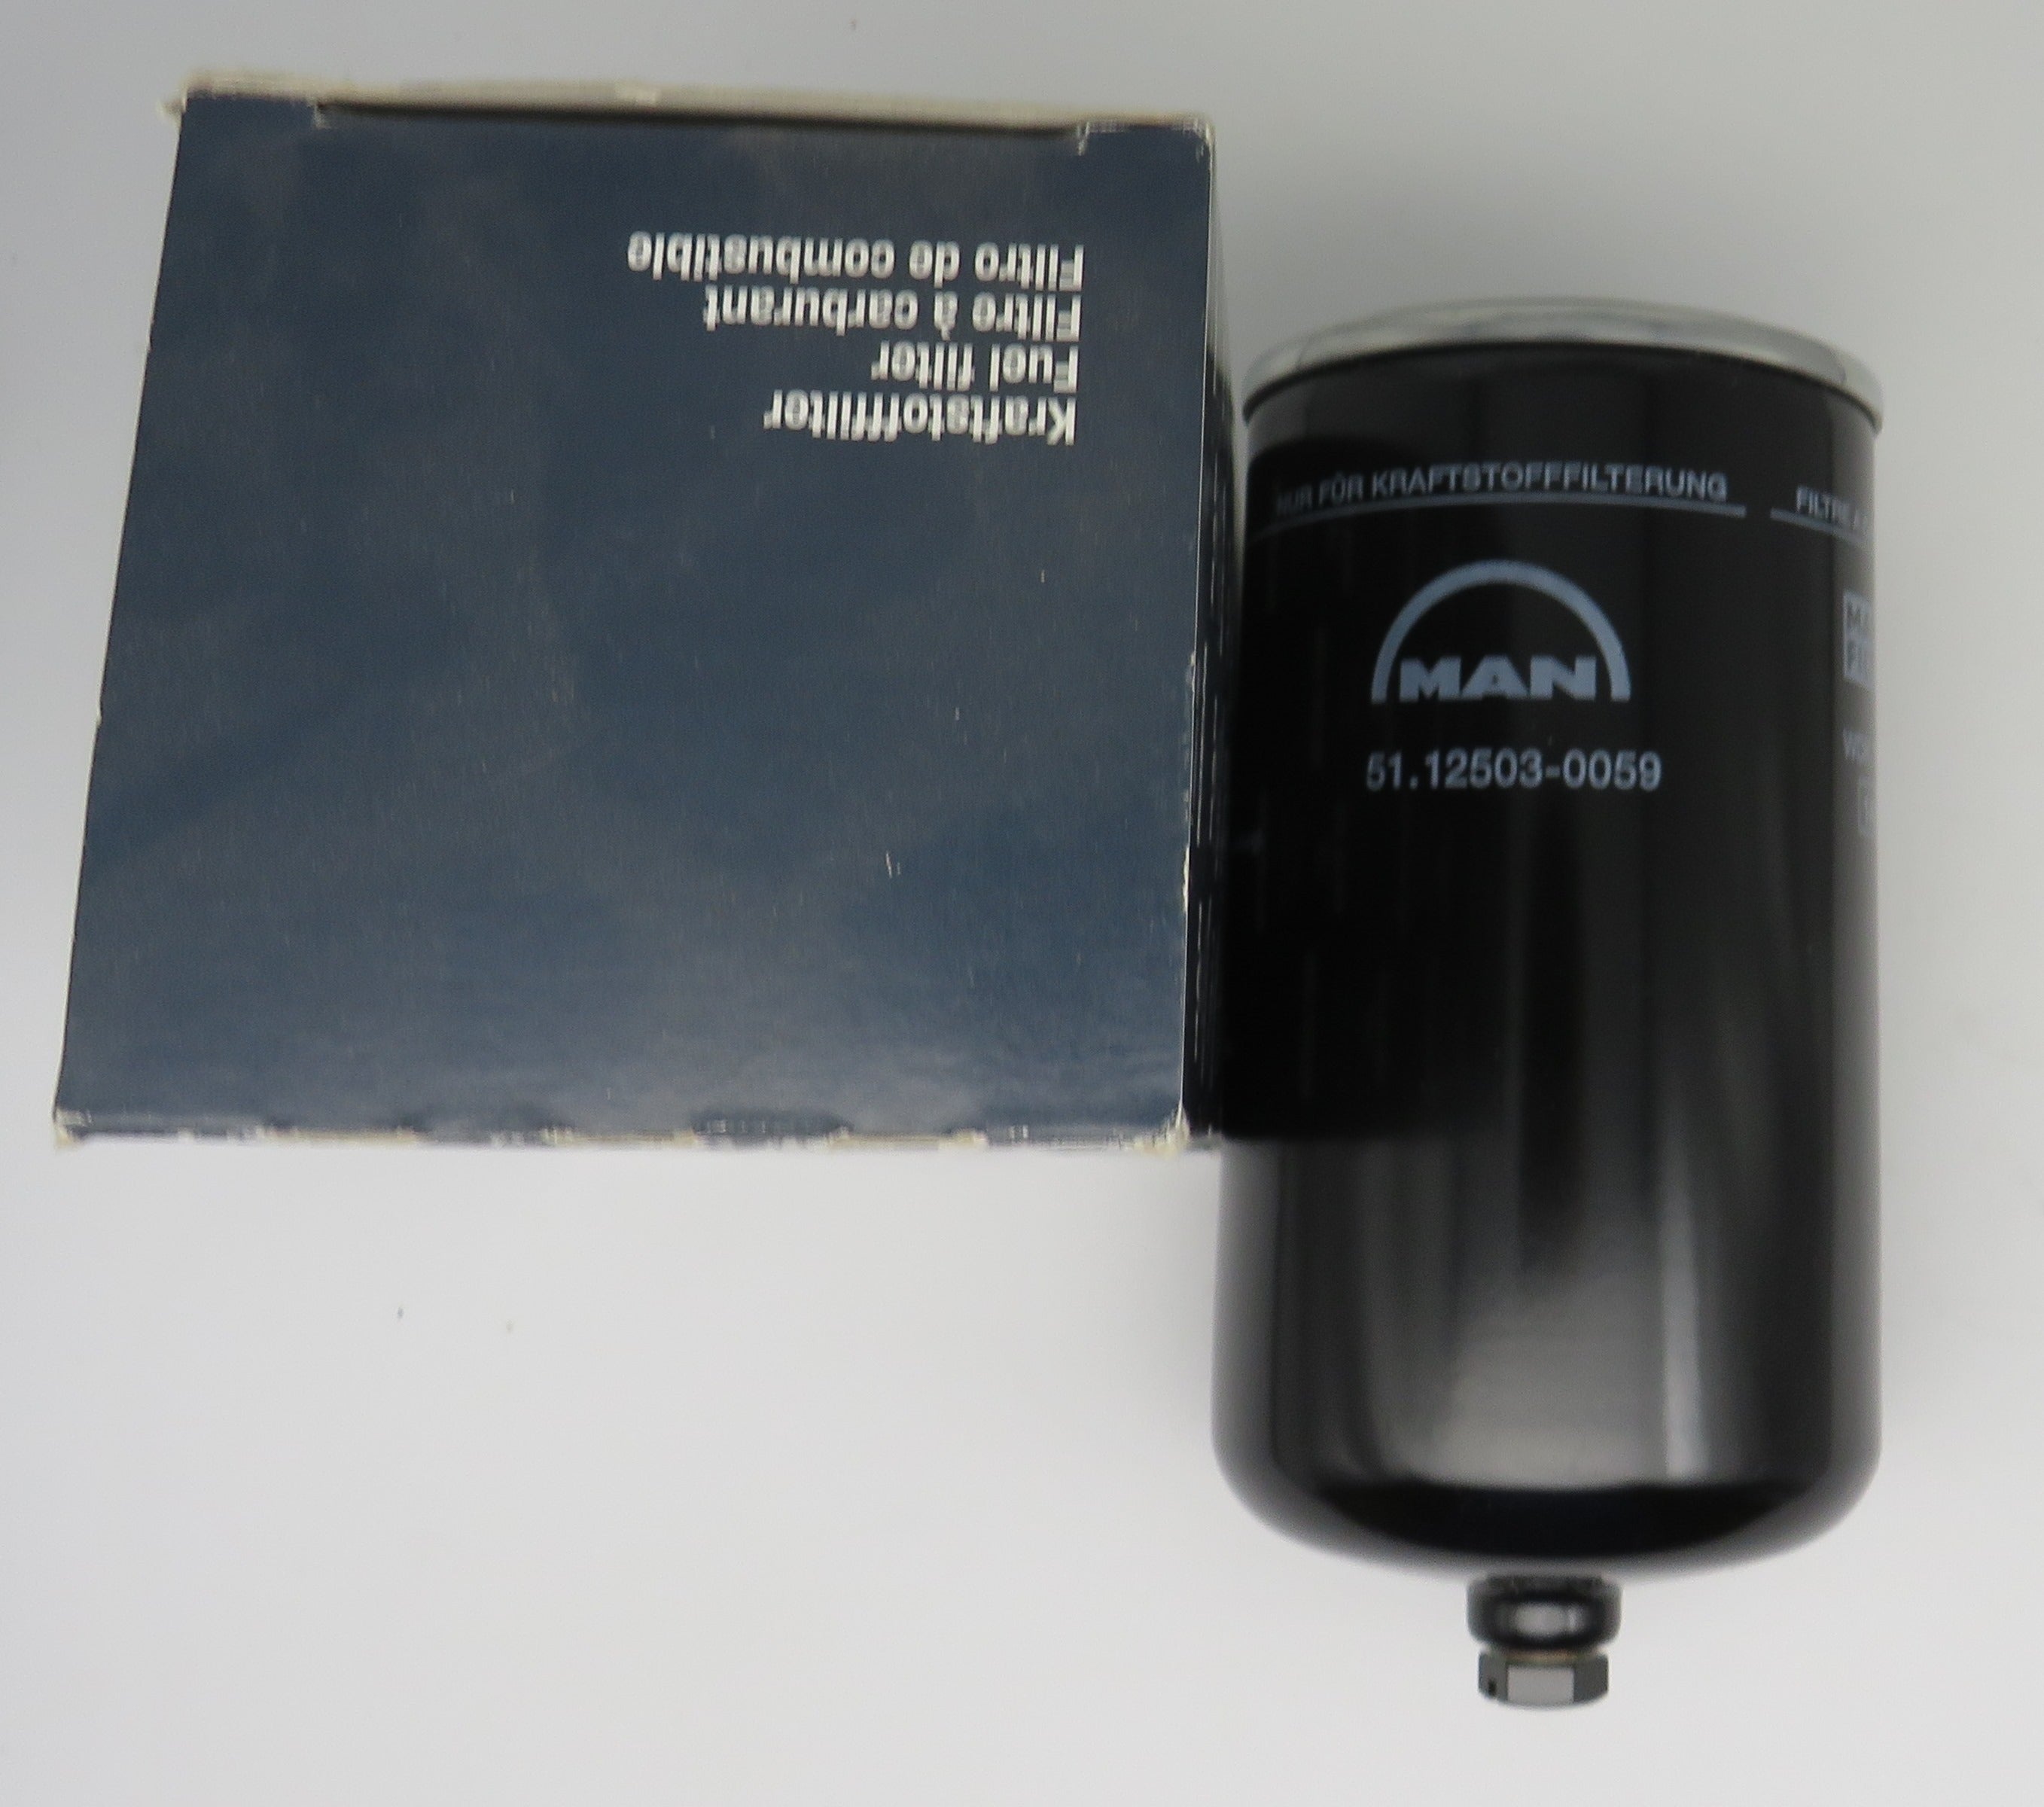 51.12503-0059 MAN Fuel Filter (Replaced by 51.12503.0099)